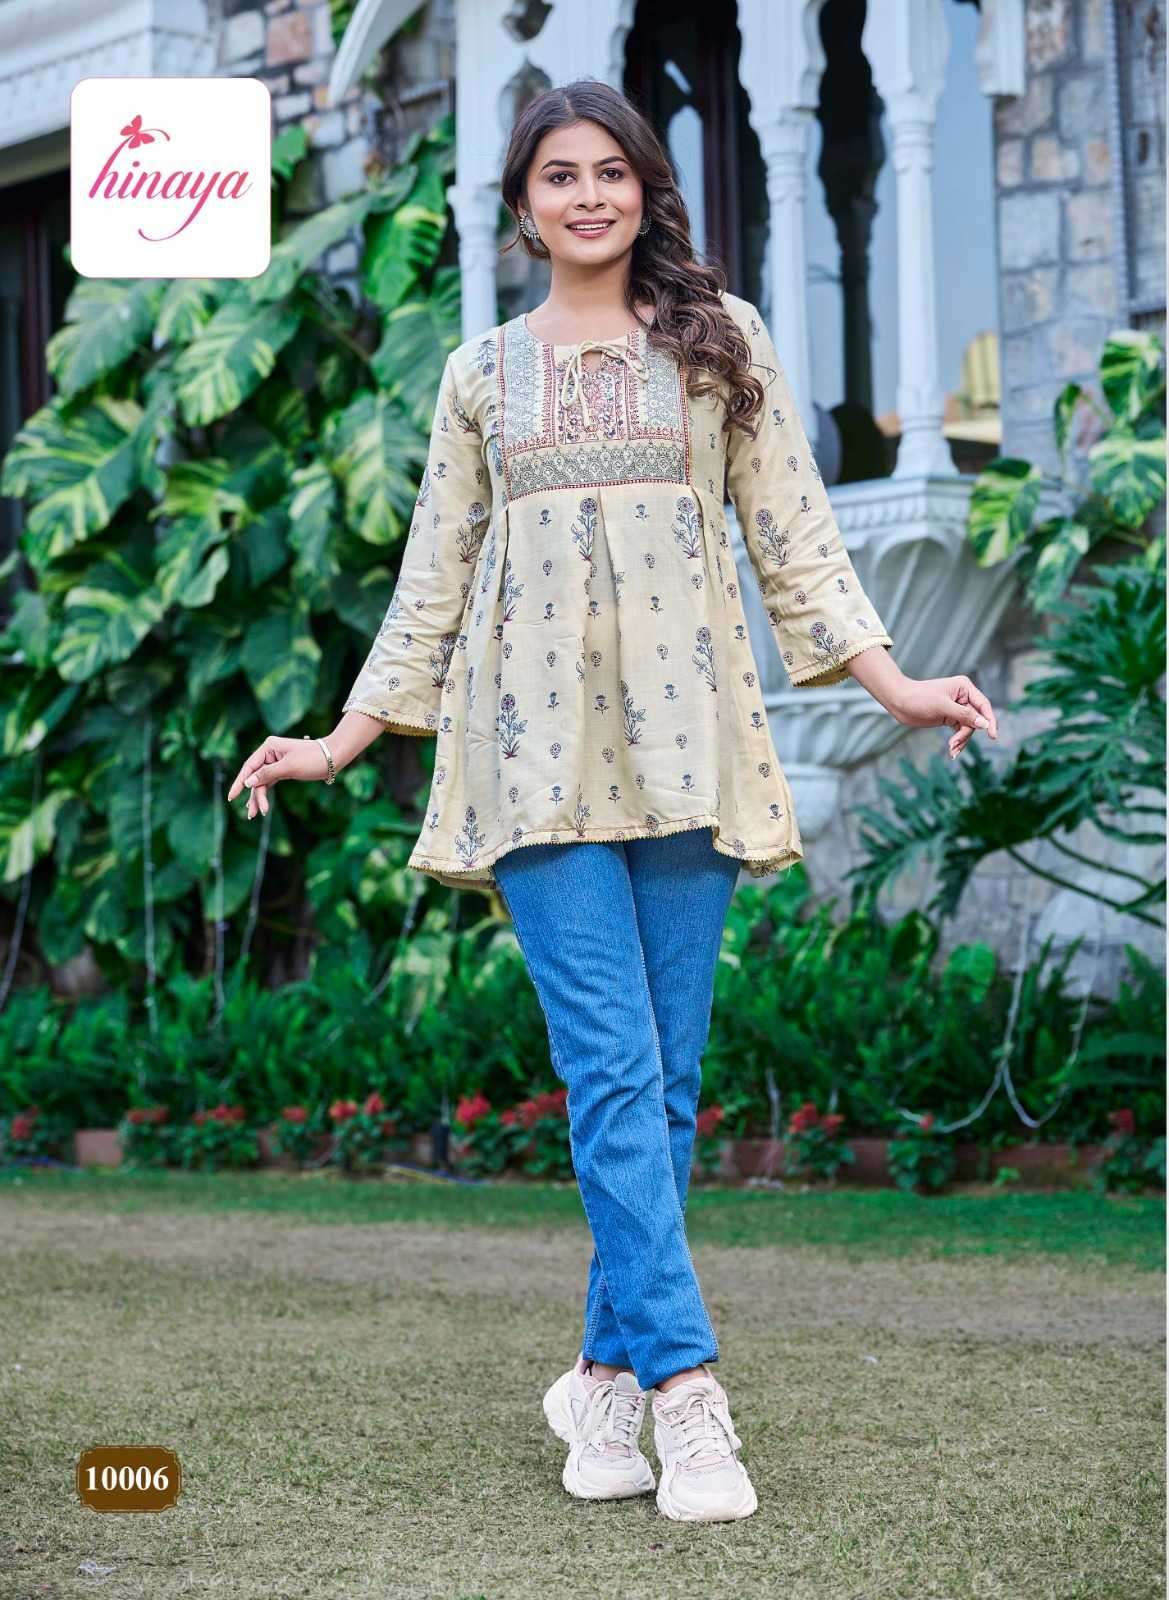 FASHION 4 YOU VOL-10 SERIES 10001 TO 10008 TOP BY HINAYA DESIGNER PRINTED RAYON TOPS ARE AVAILABLE AT WHOLESALE PRICE